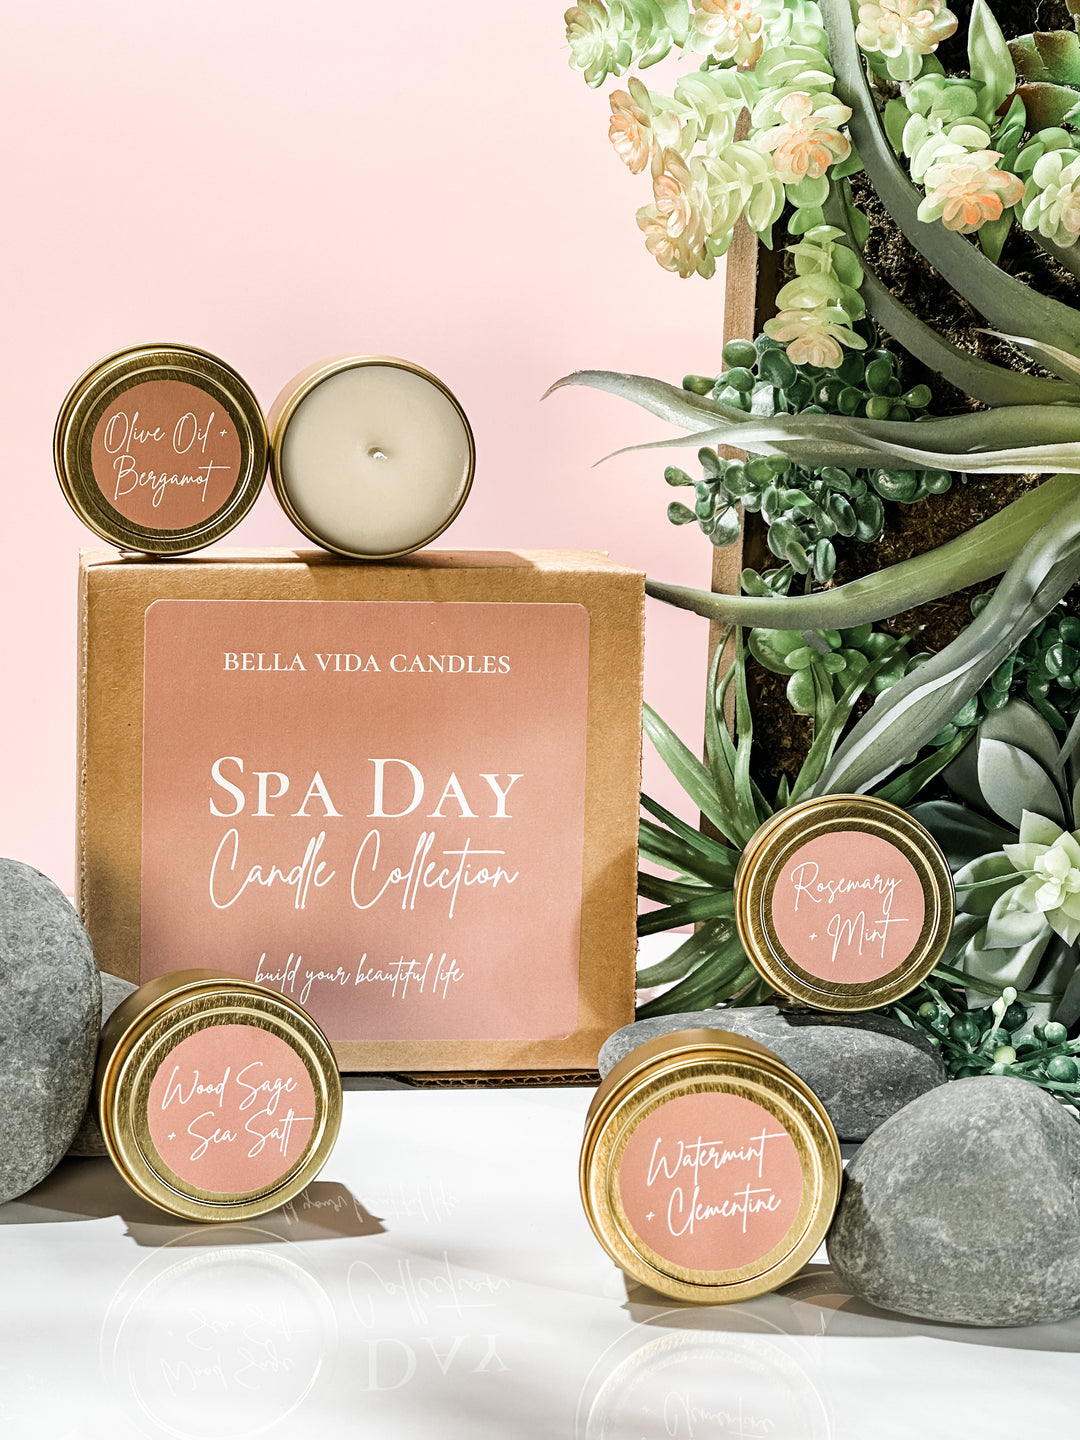 Spa Day Candle Sniffer Box